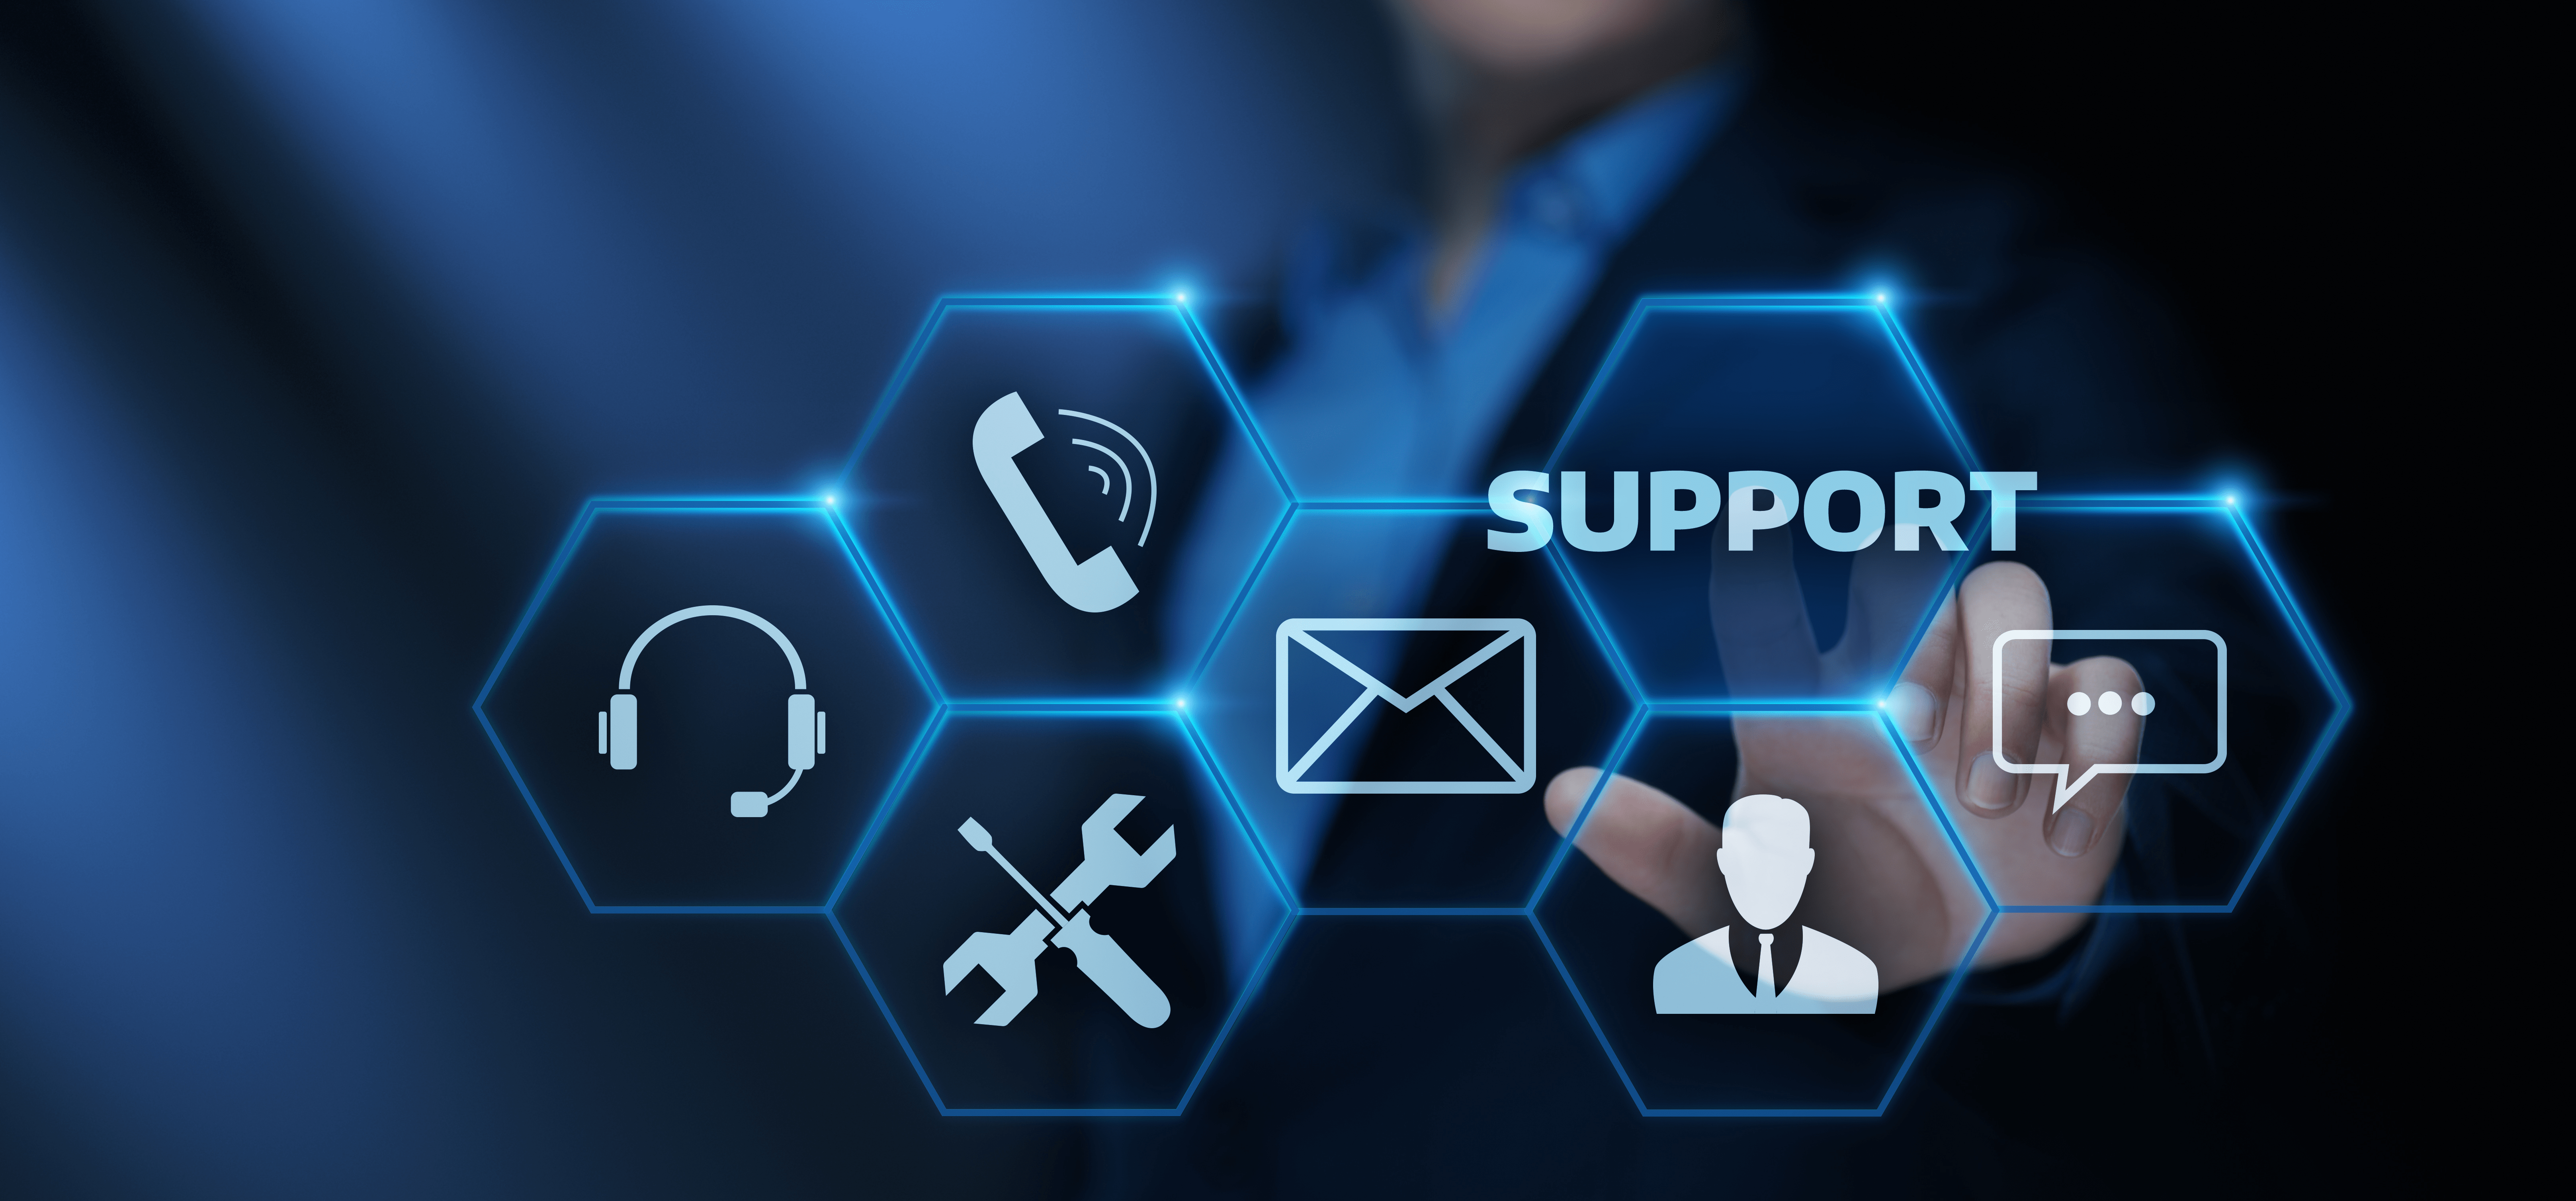 Does My Business Need External IT Support? How Do I Decide?